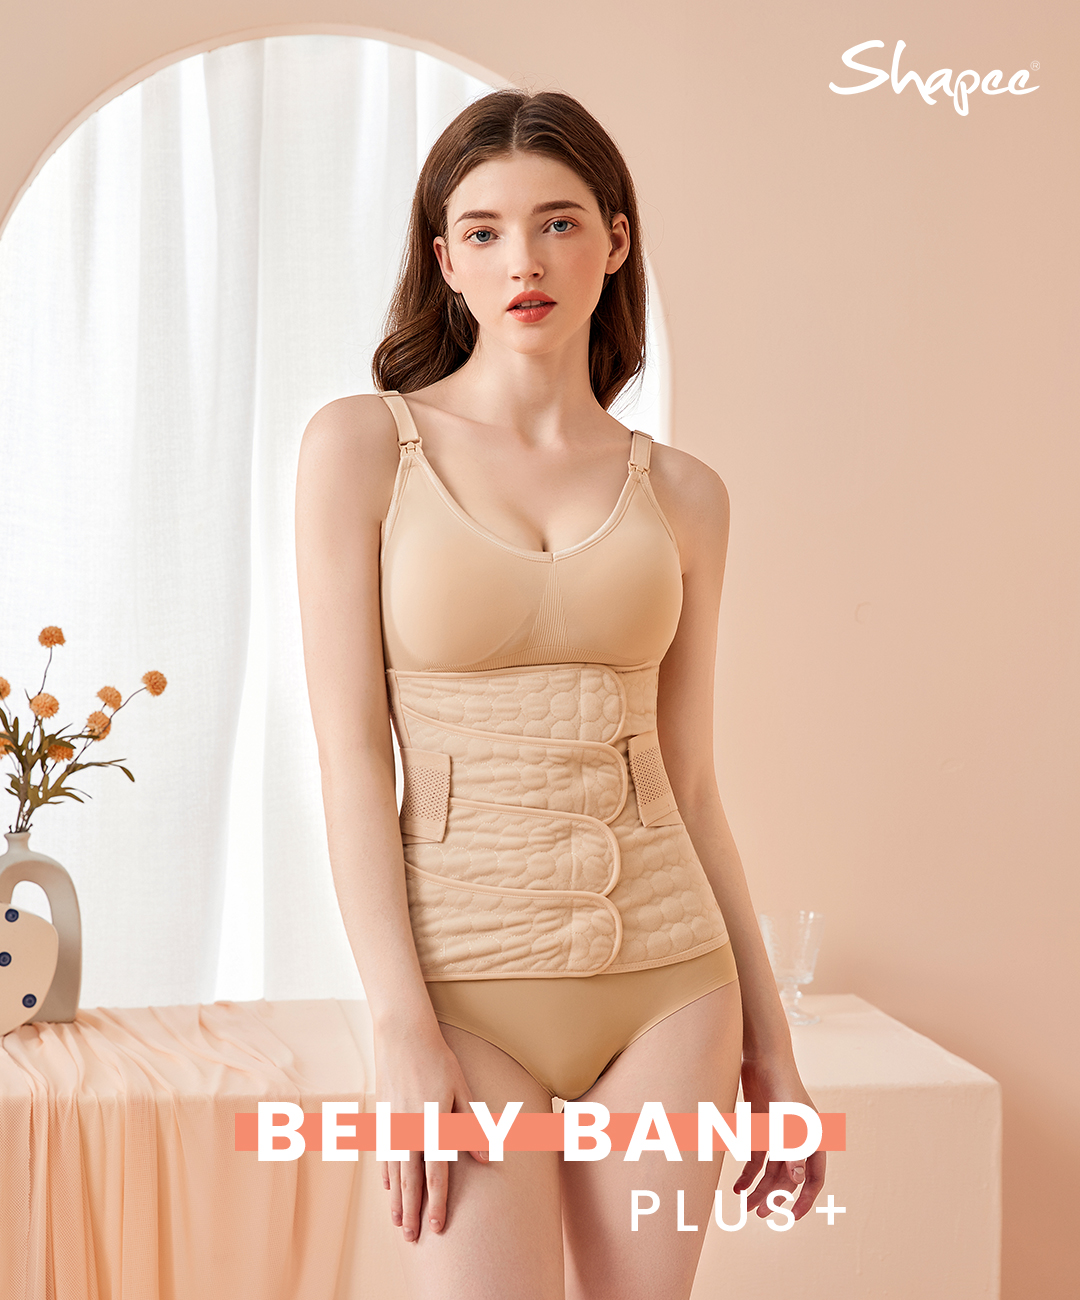 Shapee Belly Band Plus +